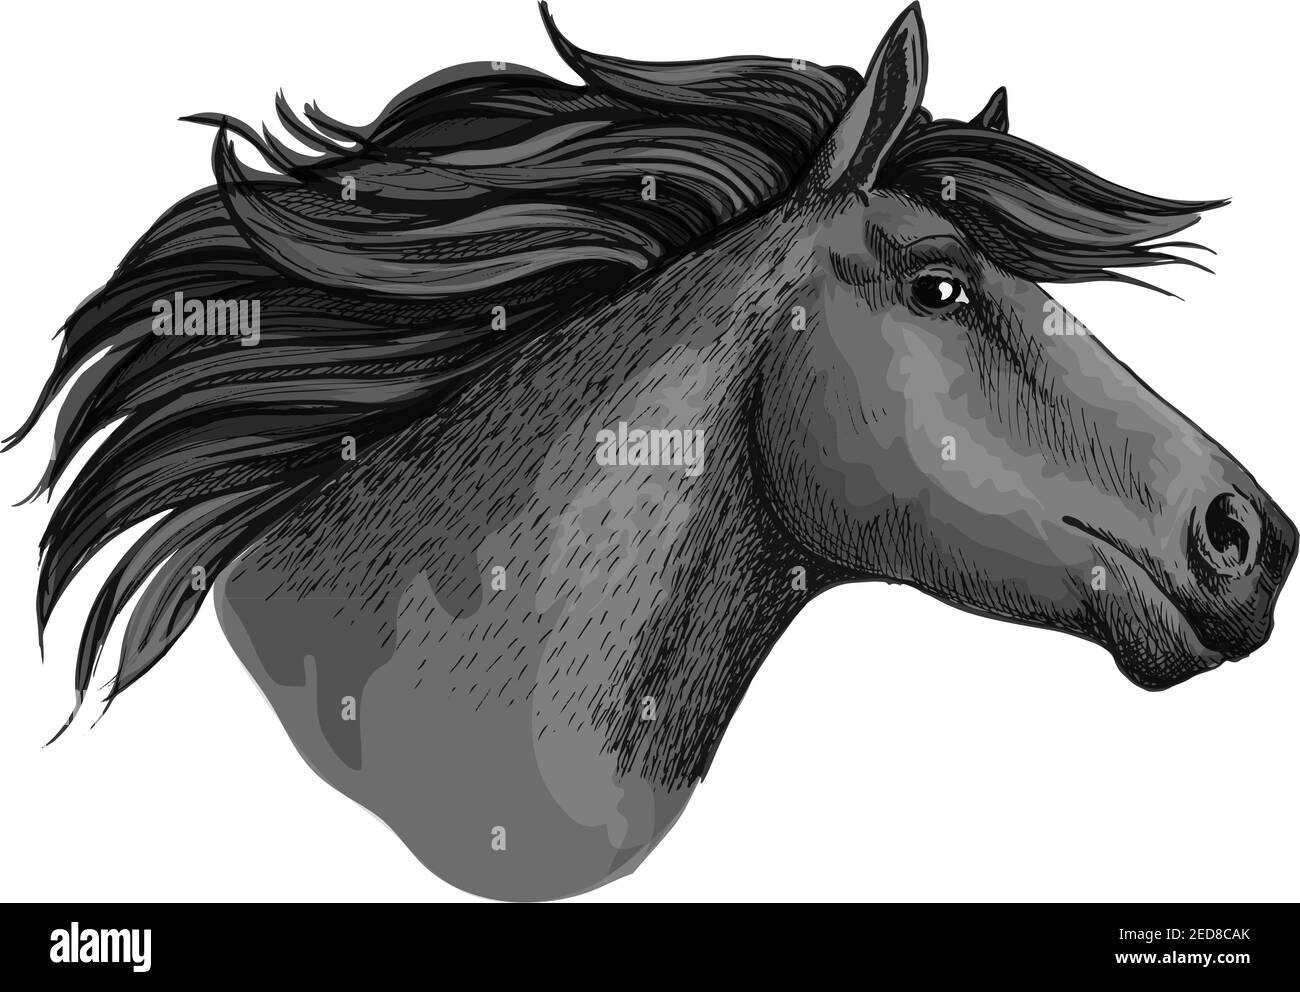 Mare horse or mustang head sketch. Broodmare or equine, horsey animal, dapple gray foal or filly or marish with curvy mane and long ears. Equestrian c Stock Vector